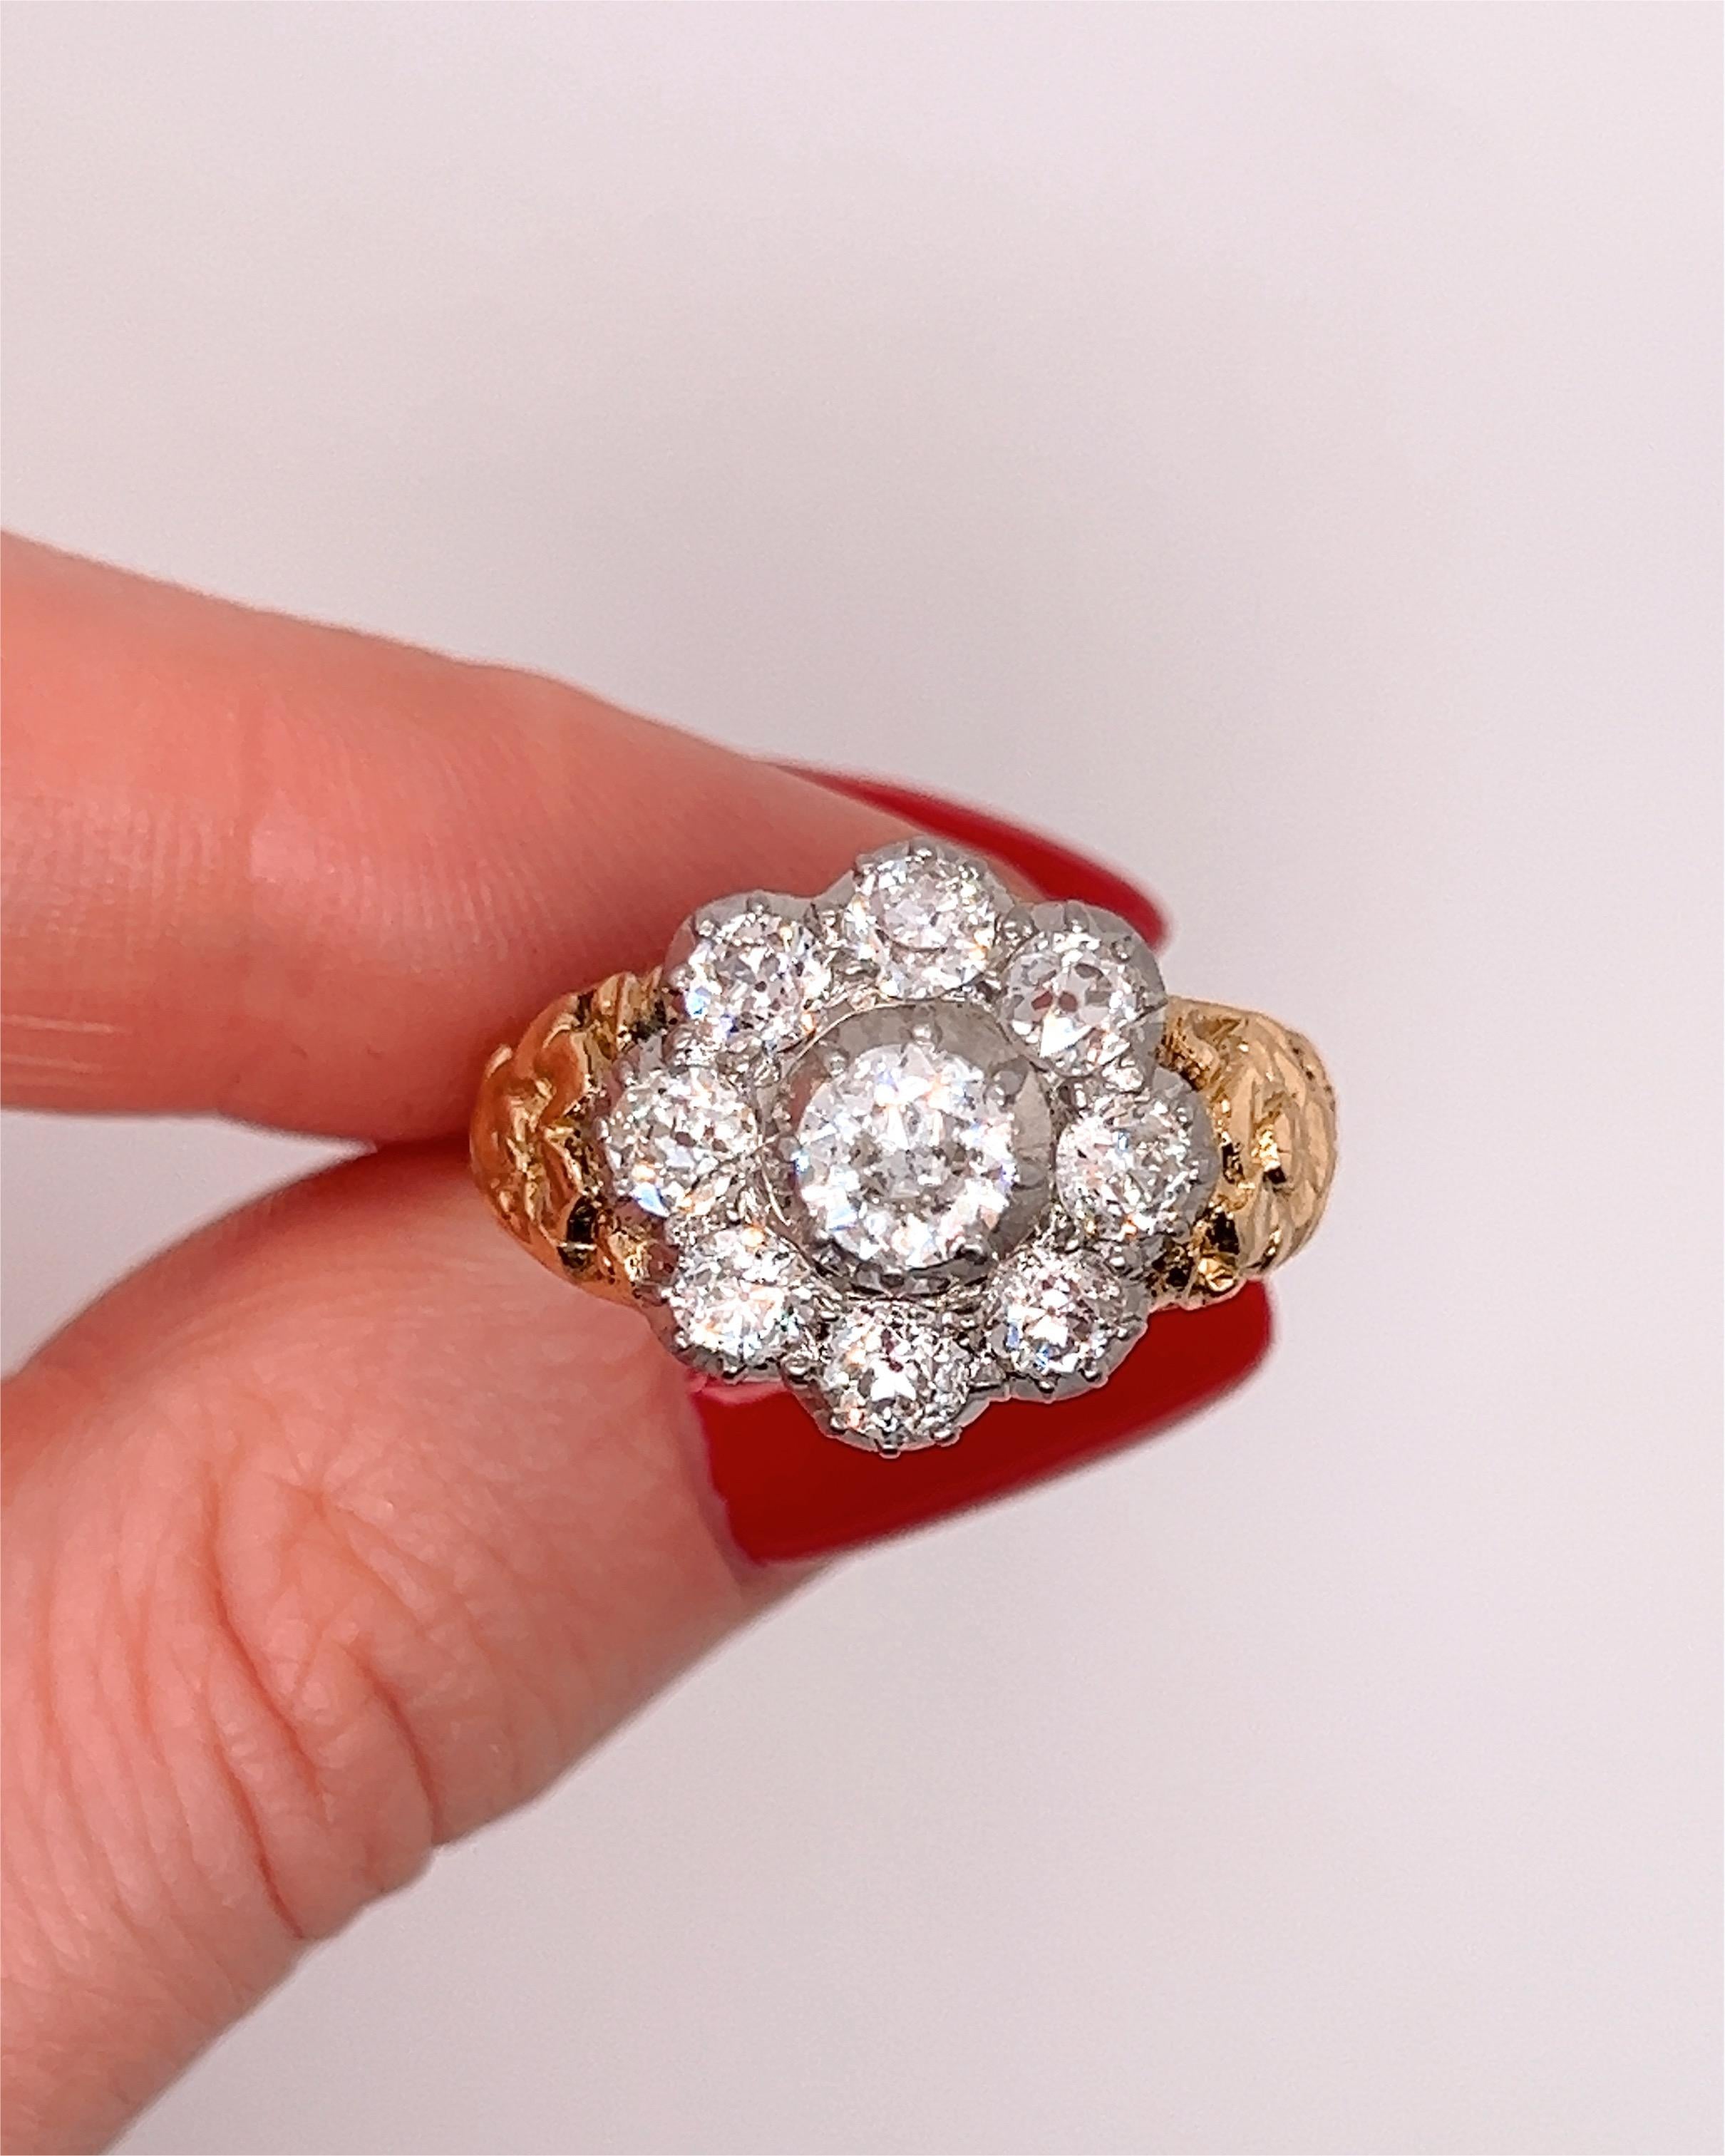 An exquisite Victorian old cut diamond cluster ring. 

18k gold victorian band with 9 old cut diamond clustered together. 

Total diamond weight is approximately 3.5cts. 

Ring size is M but can be customised to fit. 